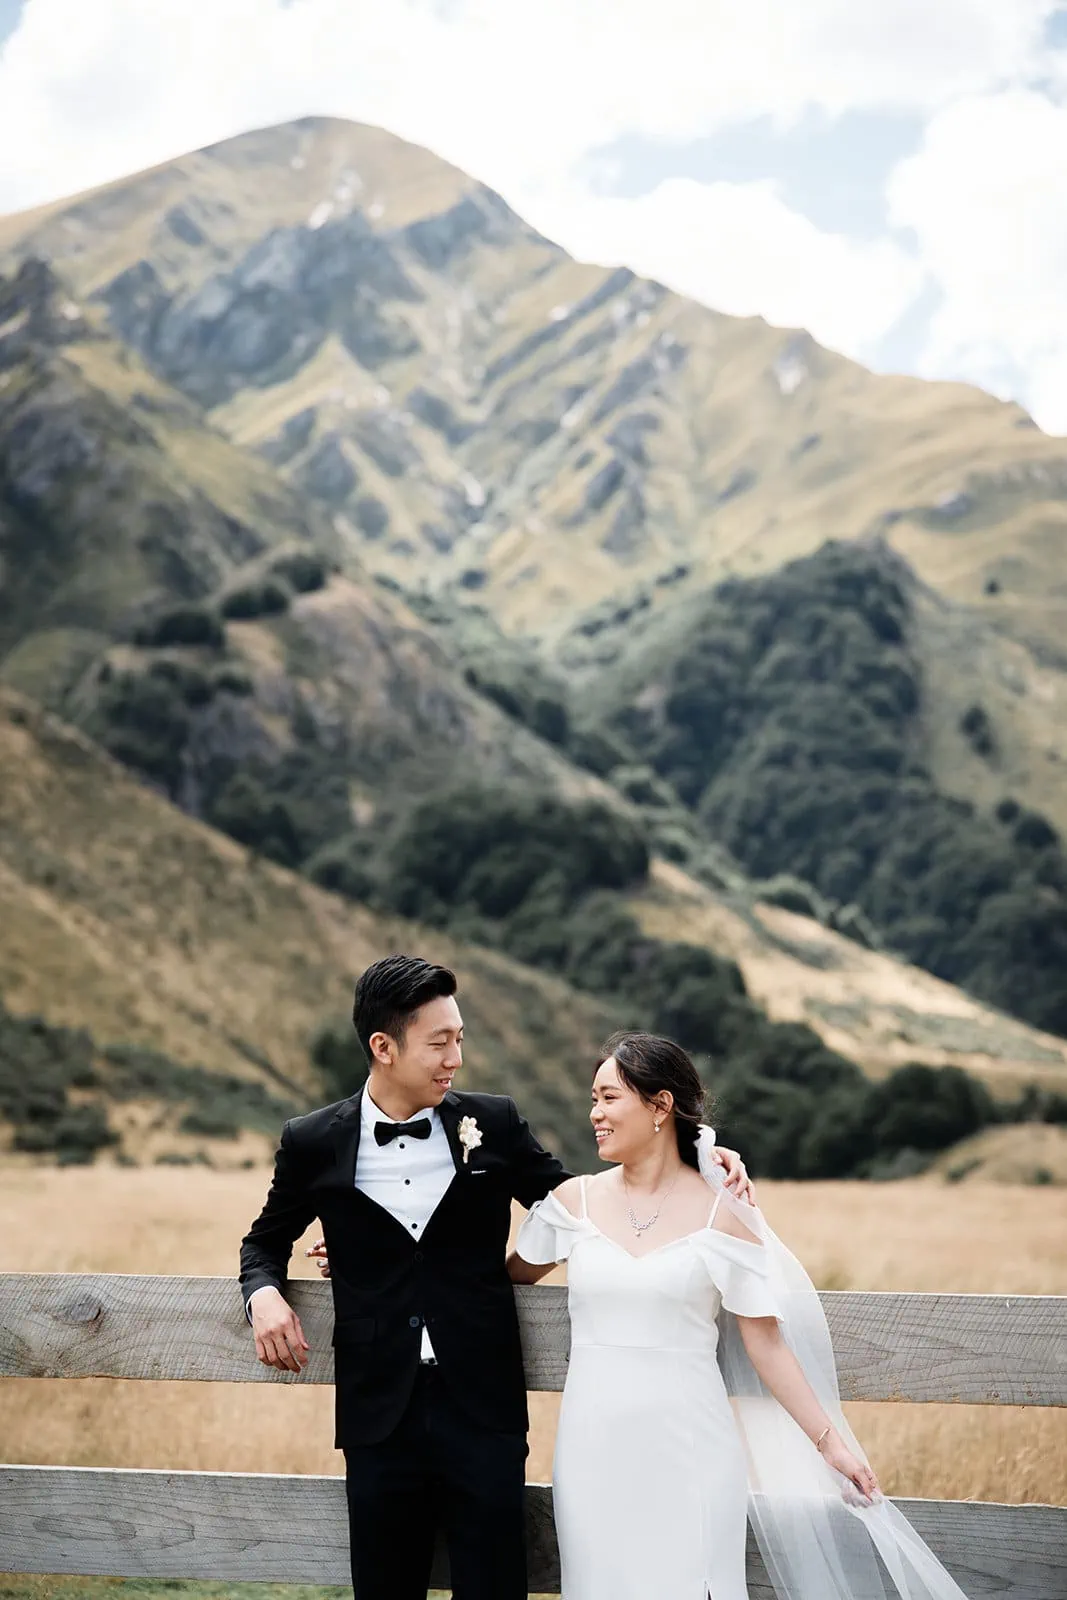 Dios & Carlyn's Queenstown Heli Pre Wedding at Cecil Peak captures a bride and groom standing in front of a majestic mountain backdrop.